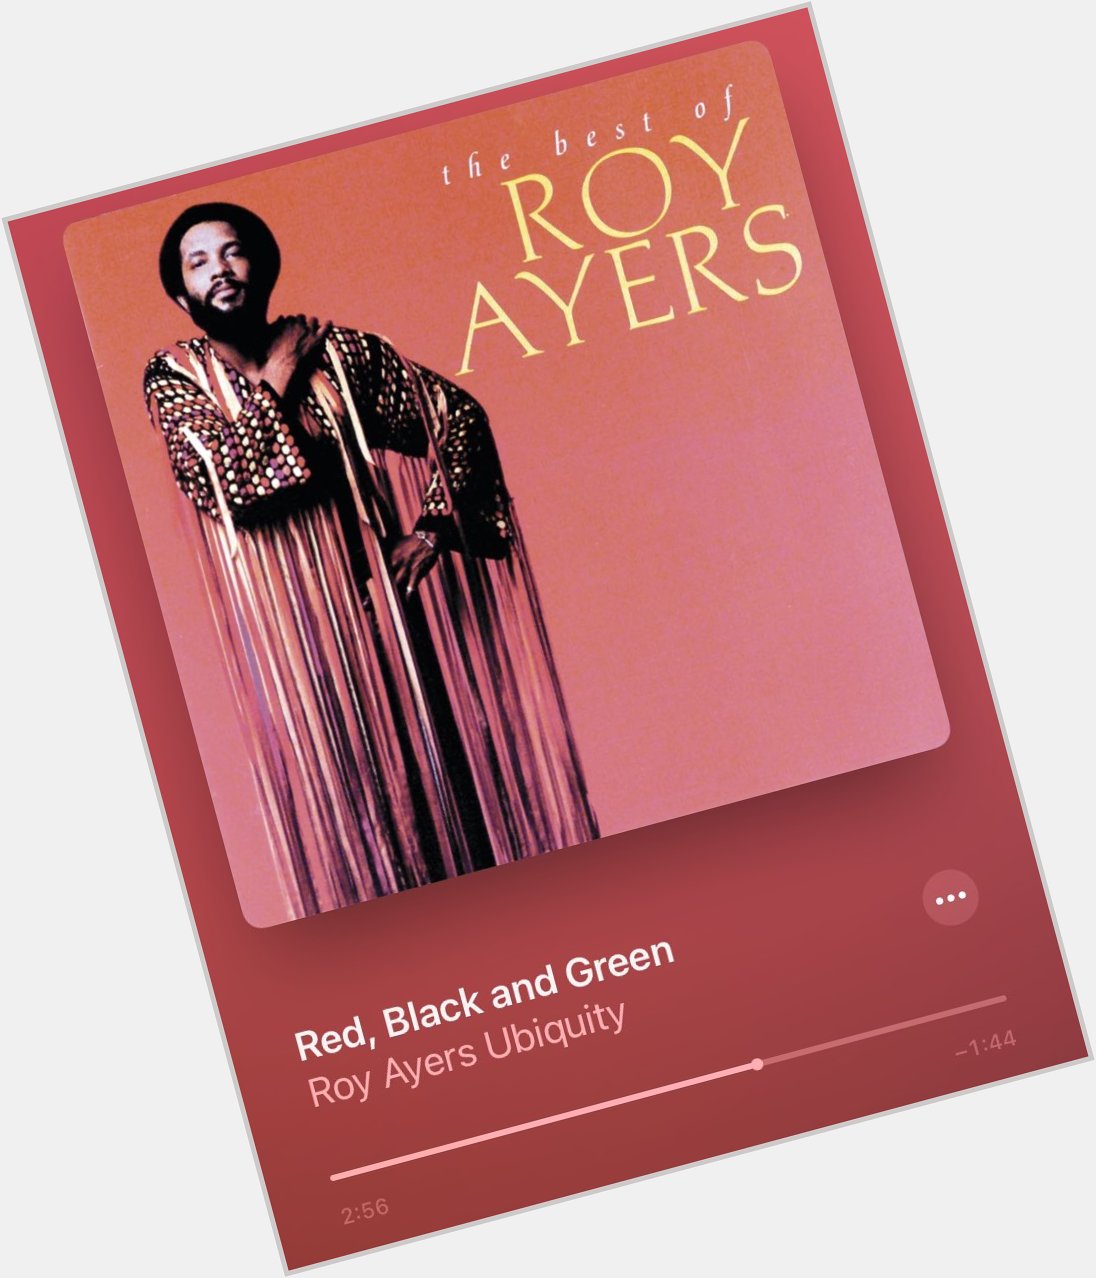   I play this once a week! Happy Birthday Roy Ayers! Poo Poo La La is also a fav 